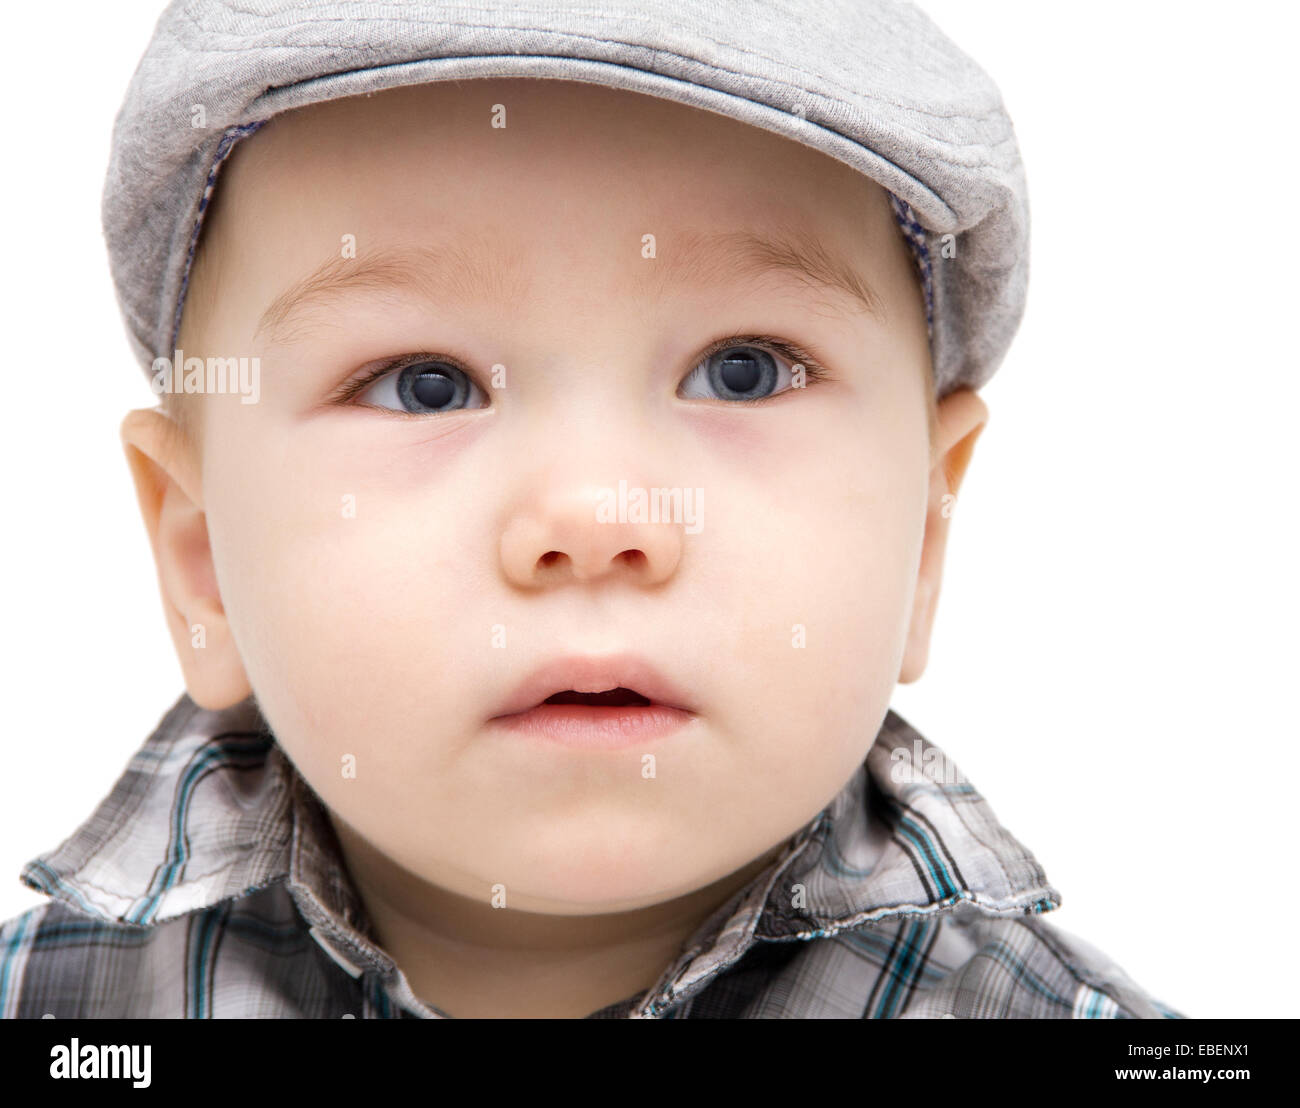 Baby look at the camera portrait Stock Photo